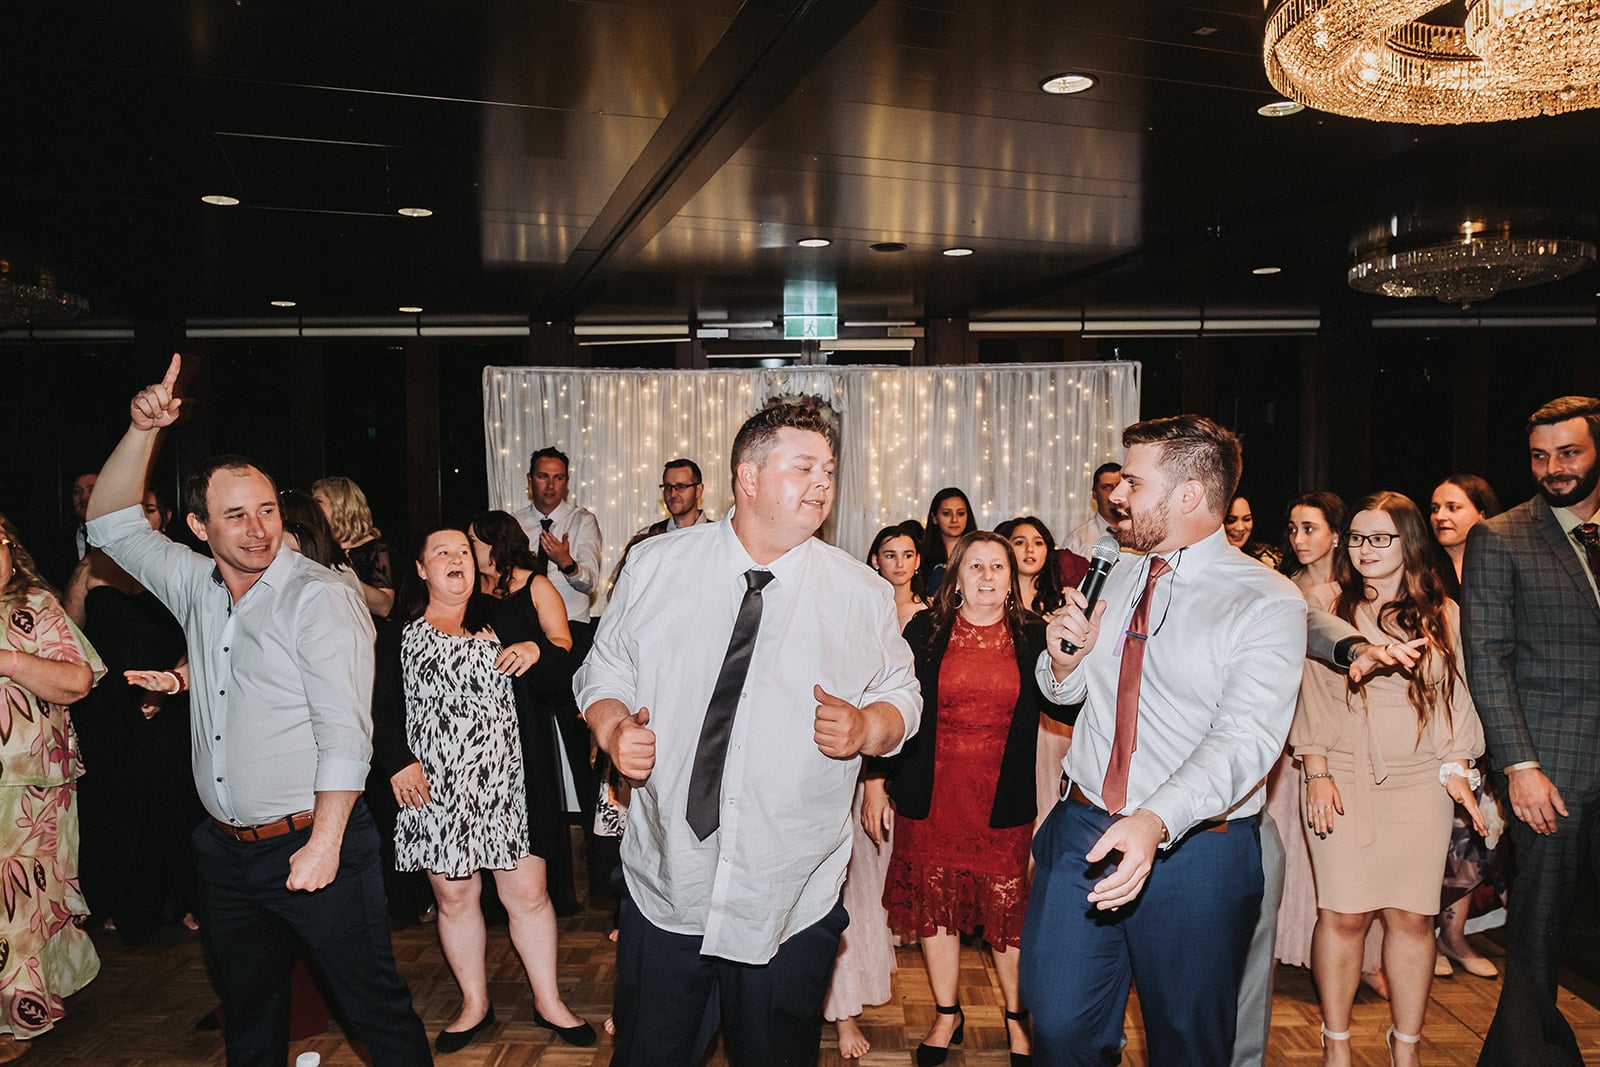 A group of wedding guests dancing in rows on the dancefloor